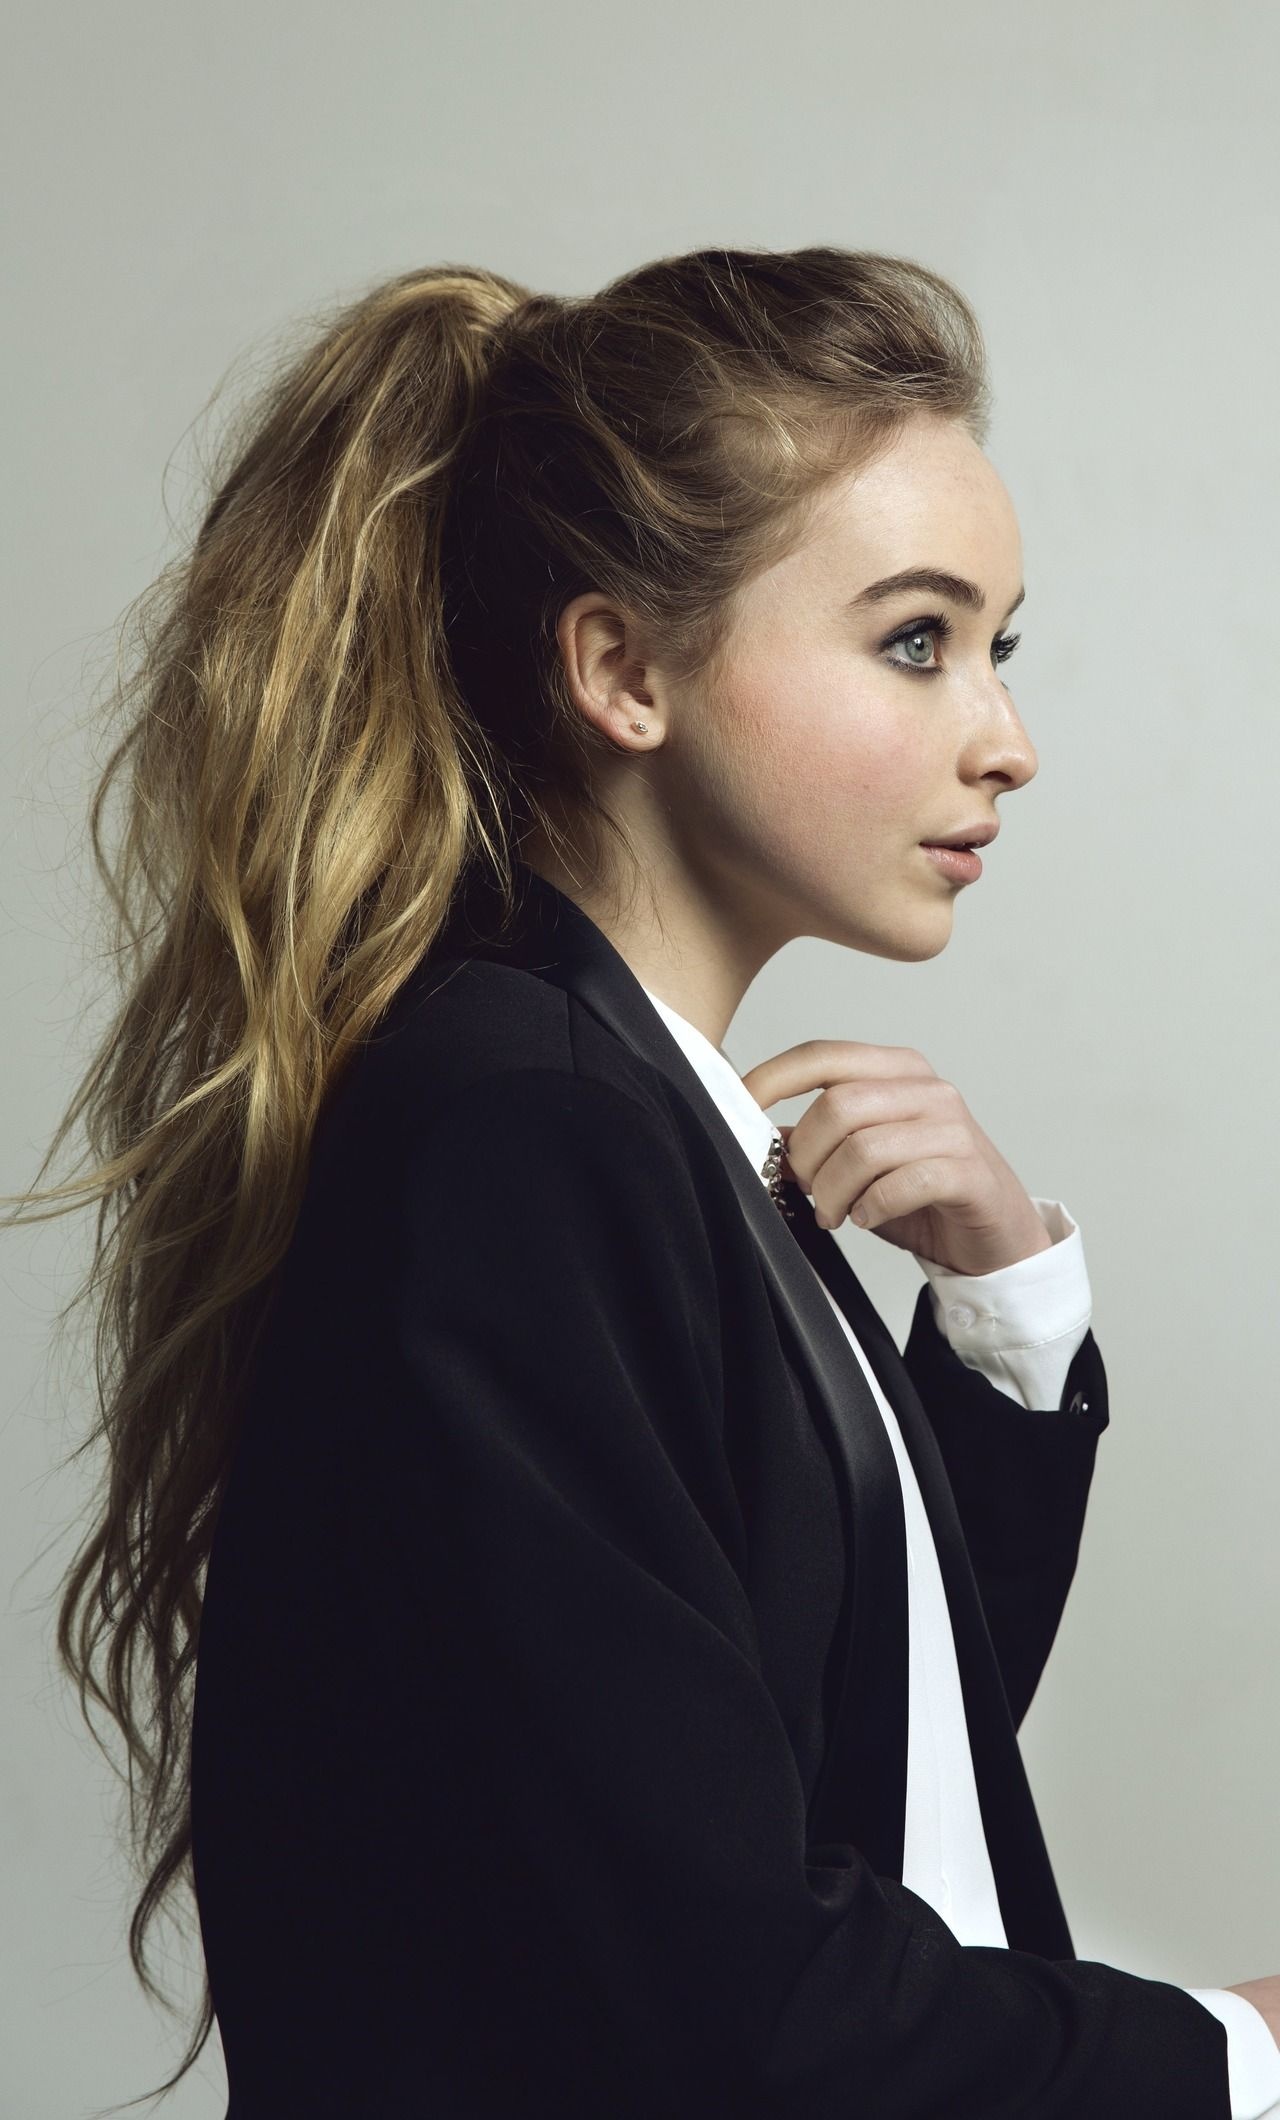 Sabrina Carpenter Movies, iPhone backgrounds, Latest images, Celebrity wallpapers, 1280x2120 HD Phone